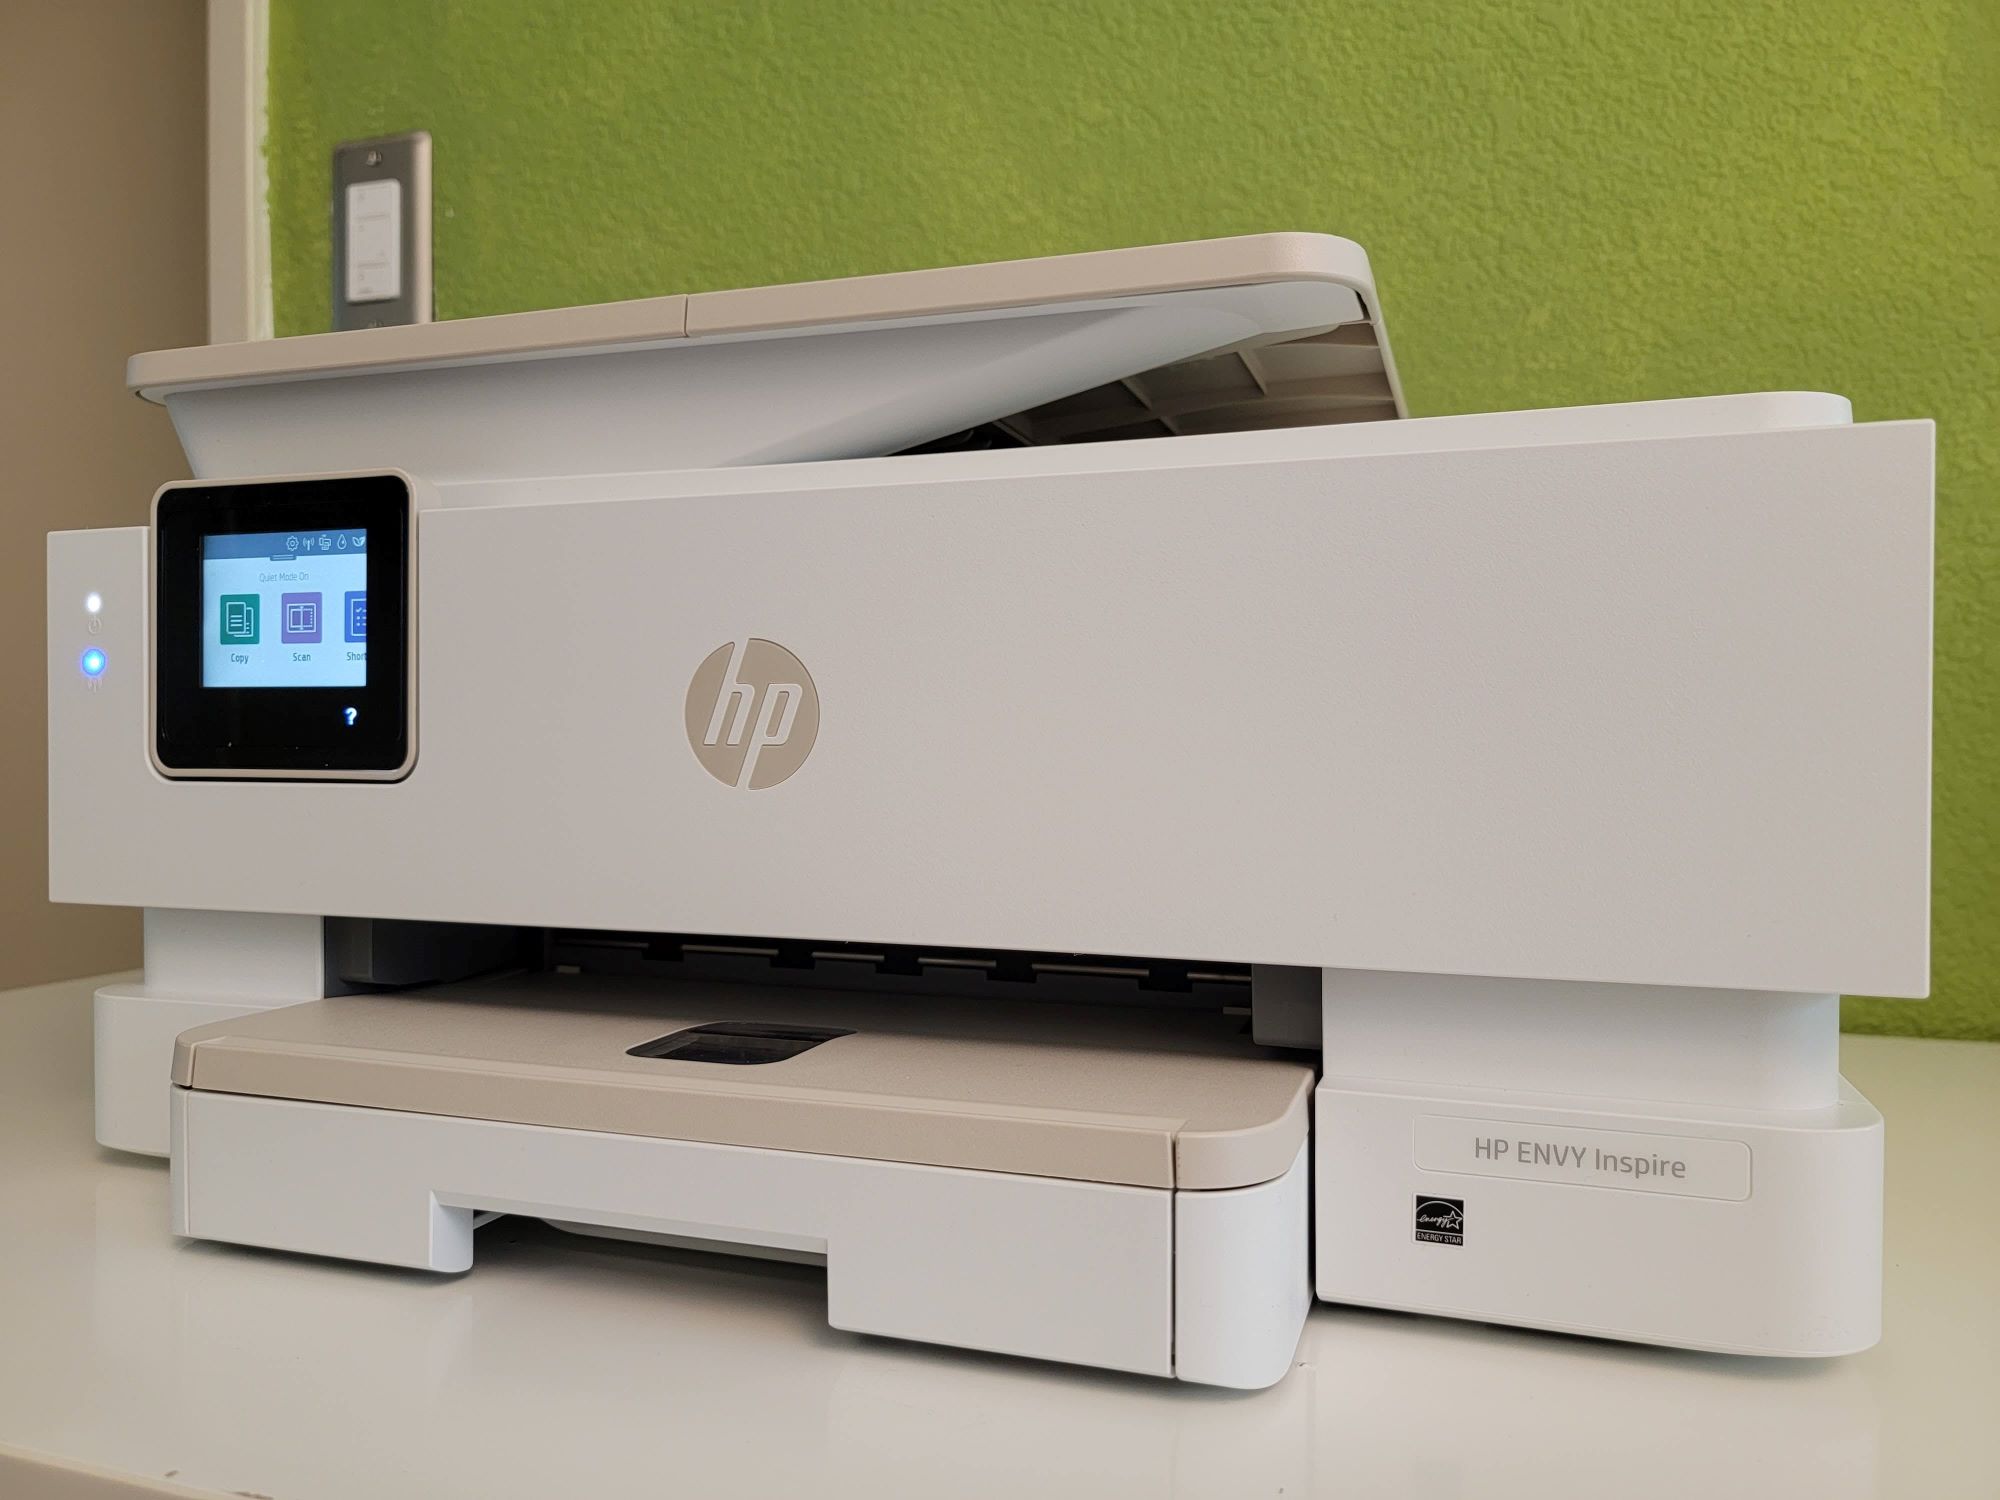 How To Remove A Printer From HP Smart